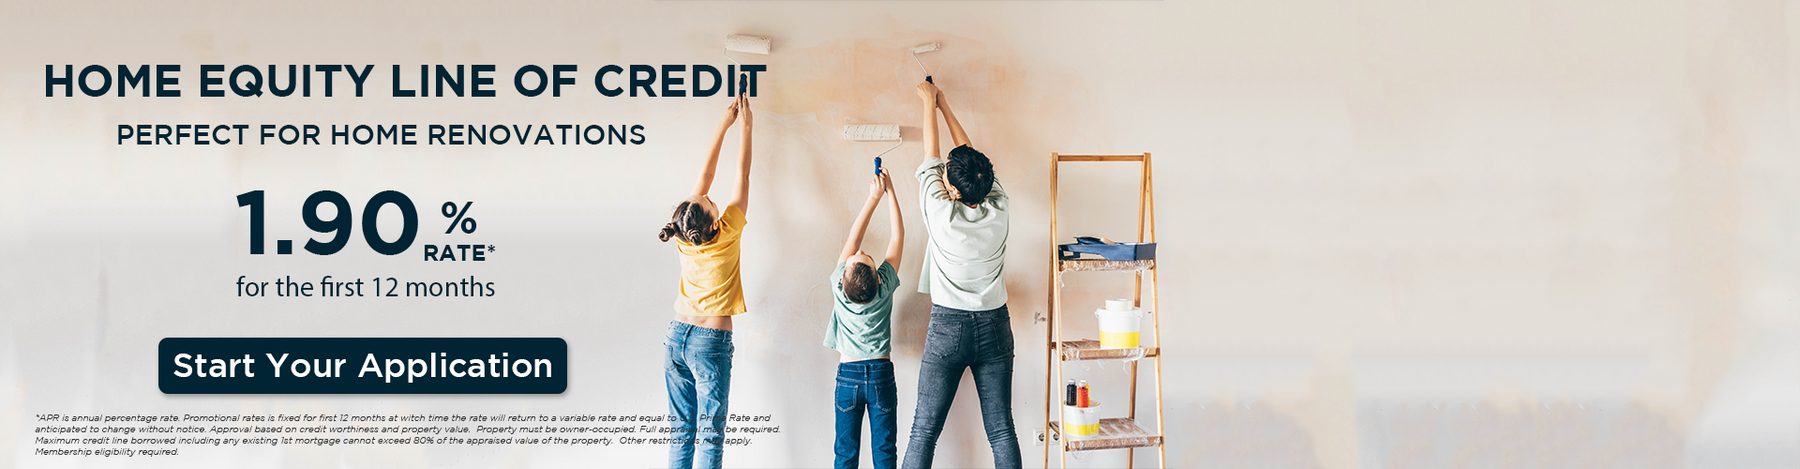 Home Equity Line of Credit Loan